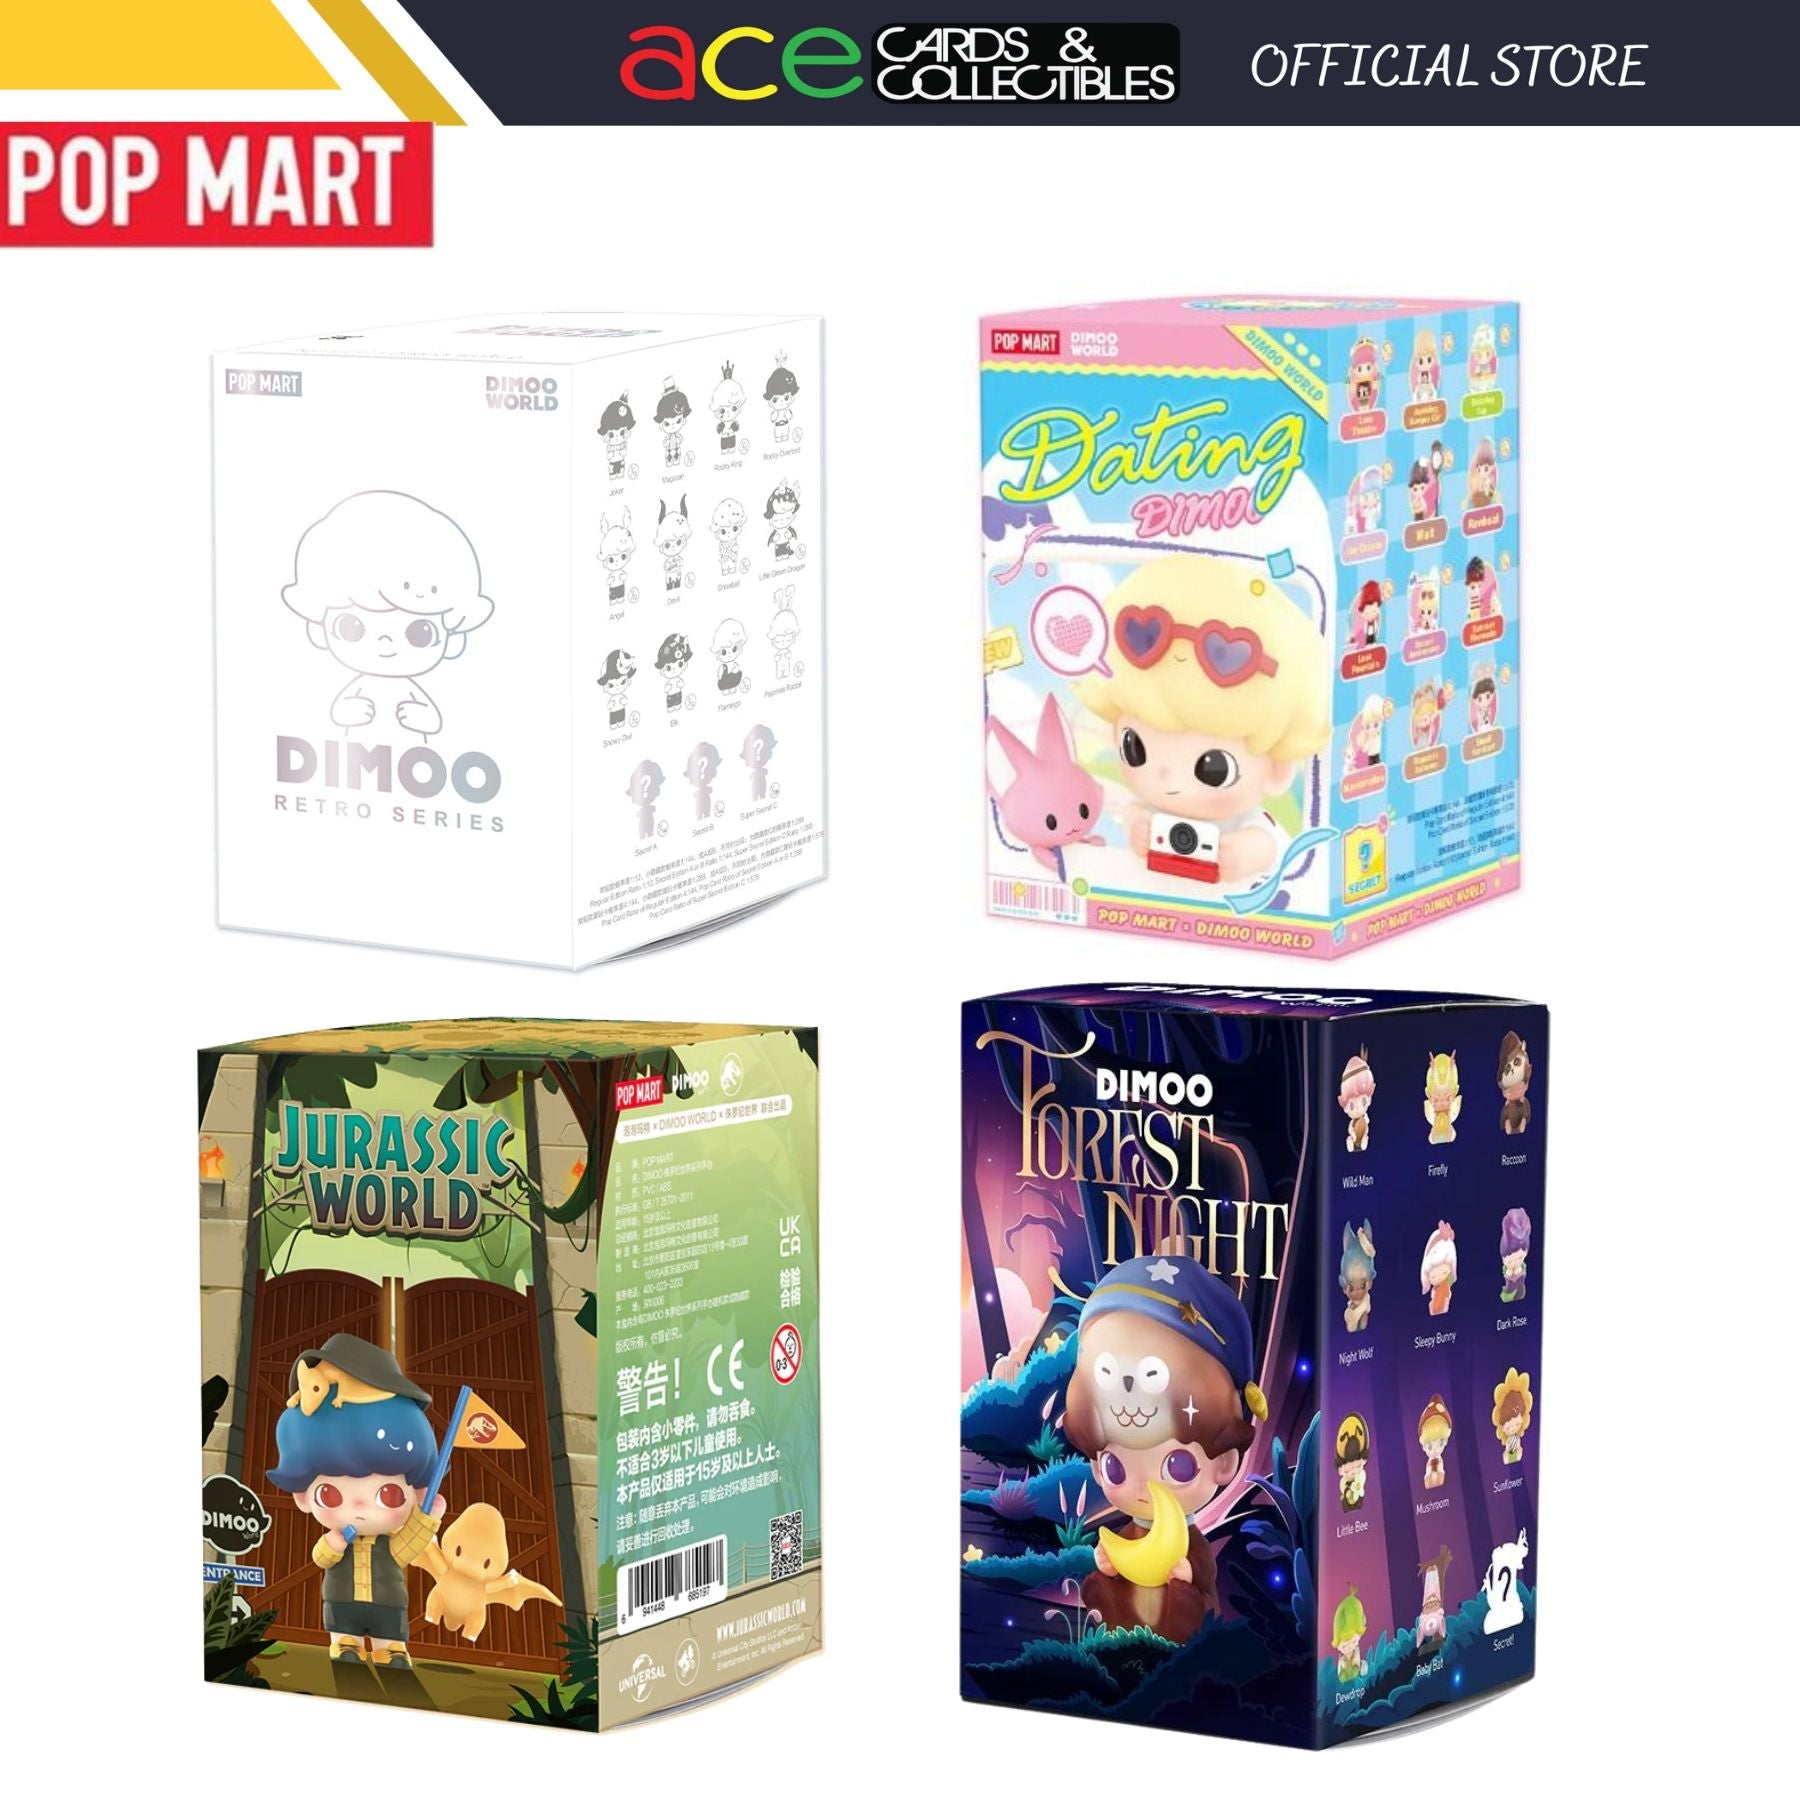 POP MART Dimoo Series-Forest Night-Pop Mart-Ace Cards & Collectibles